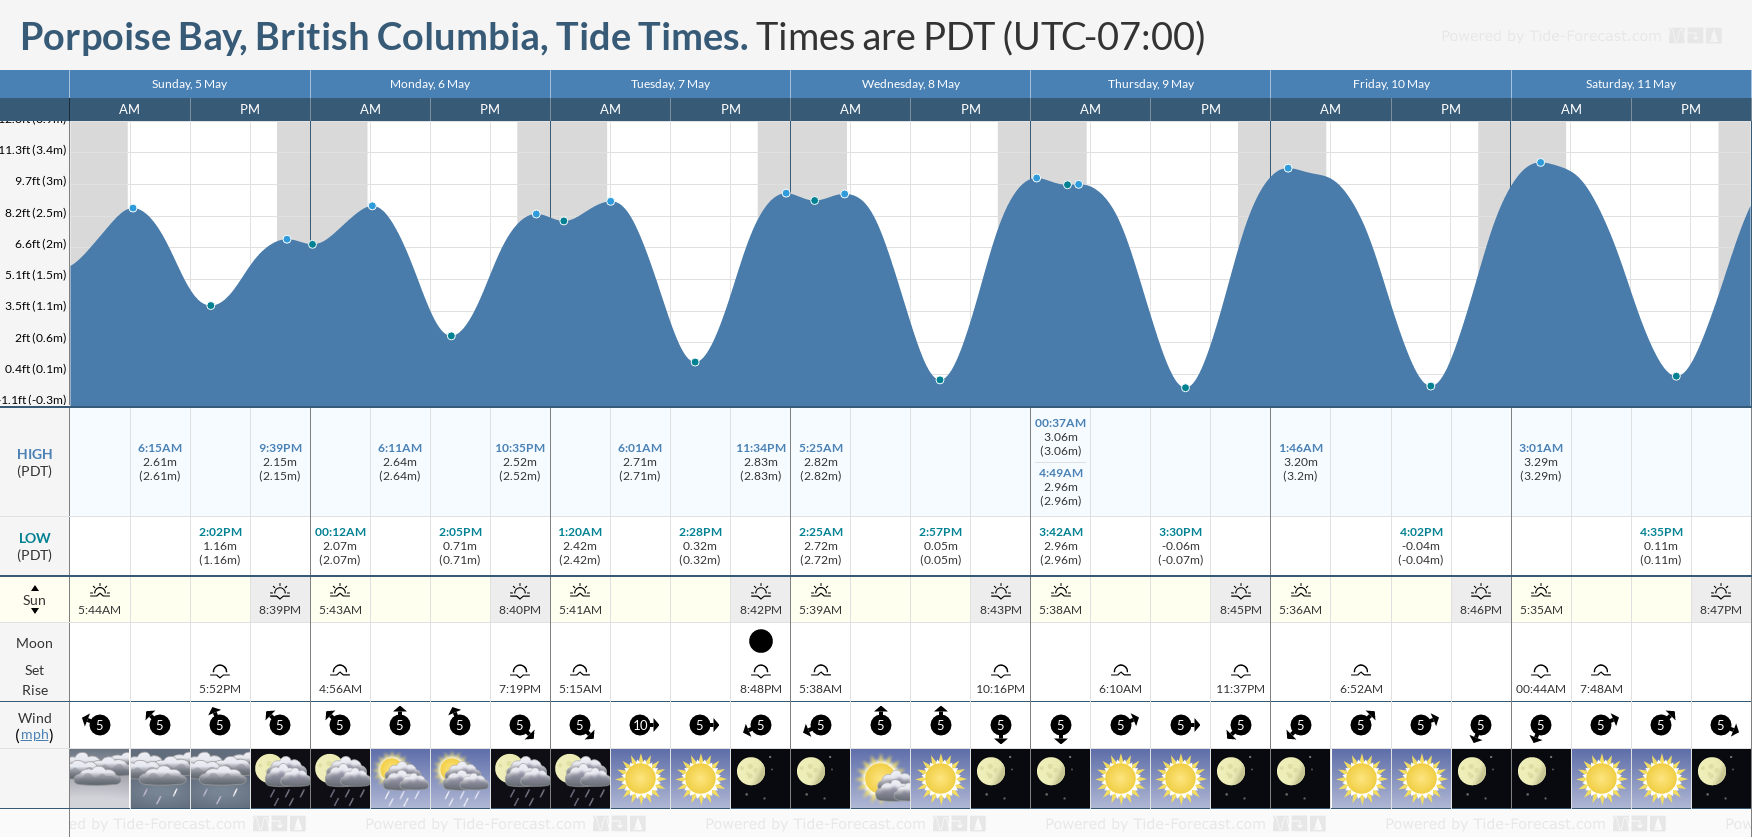 Porpoise Bay, British Columbia Tide Chart including high and low tide times for the next 7 days